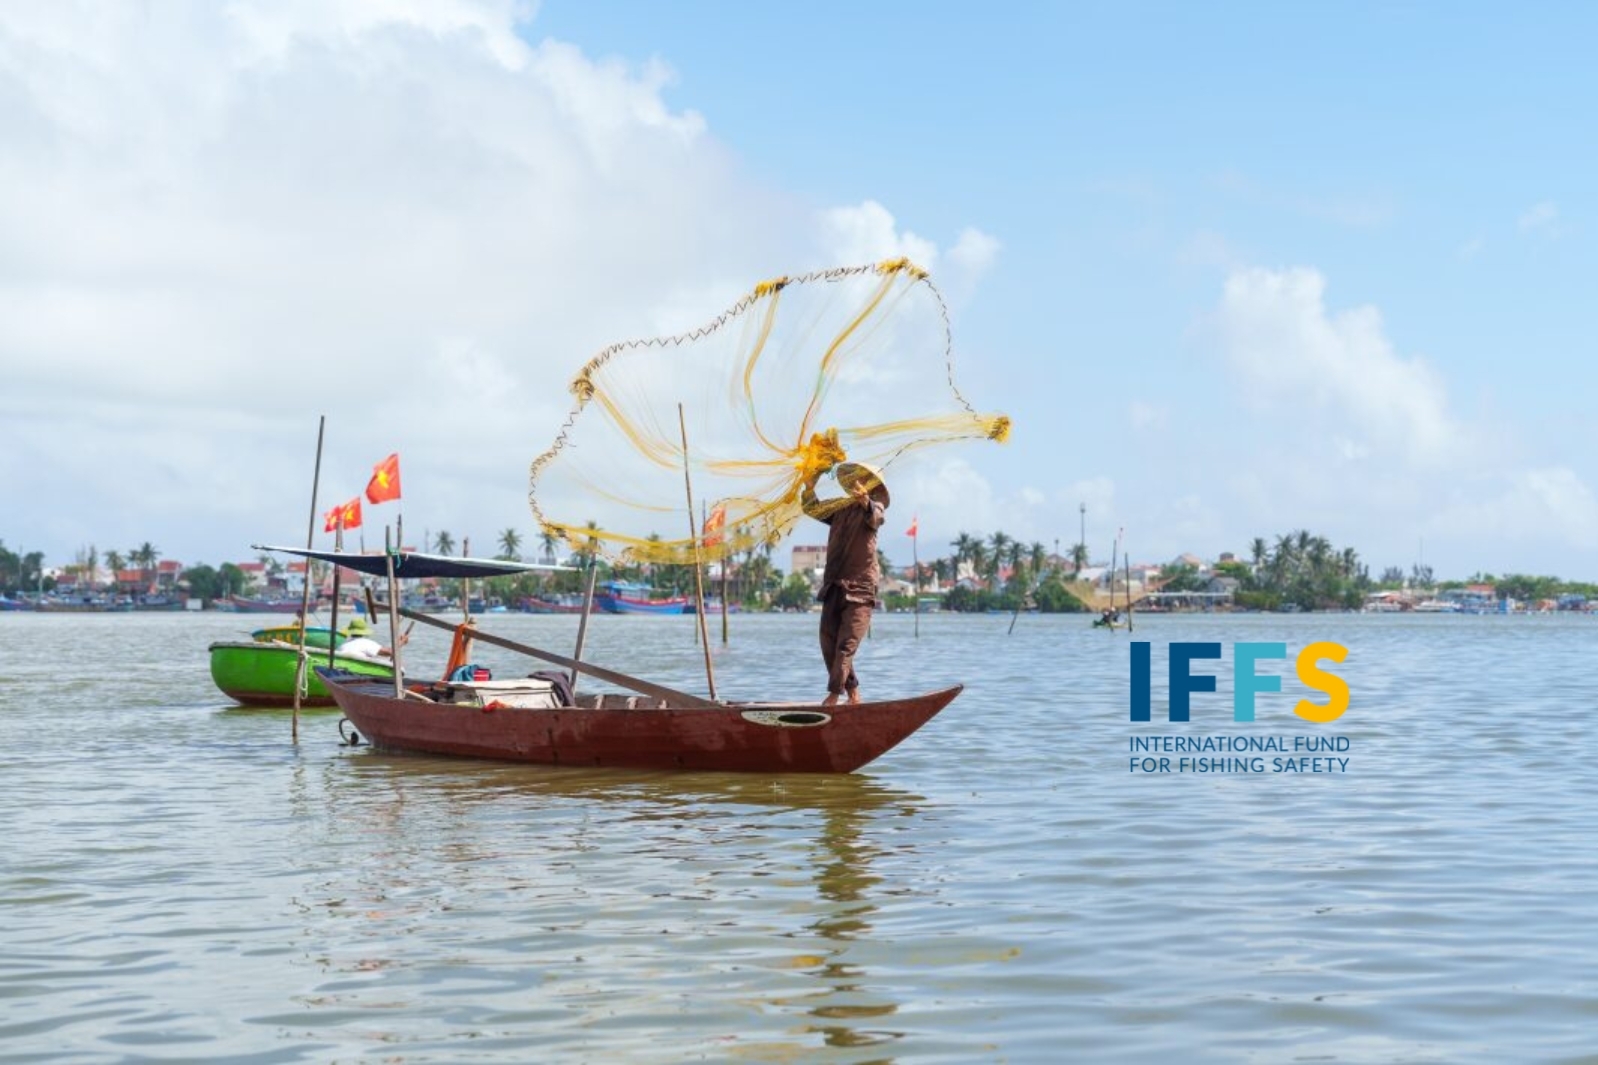 Fisher hurling nets from a low-draught boat. Image: International Fund for Fishing Safety